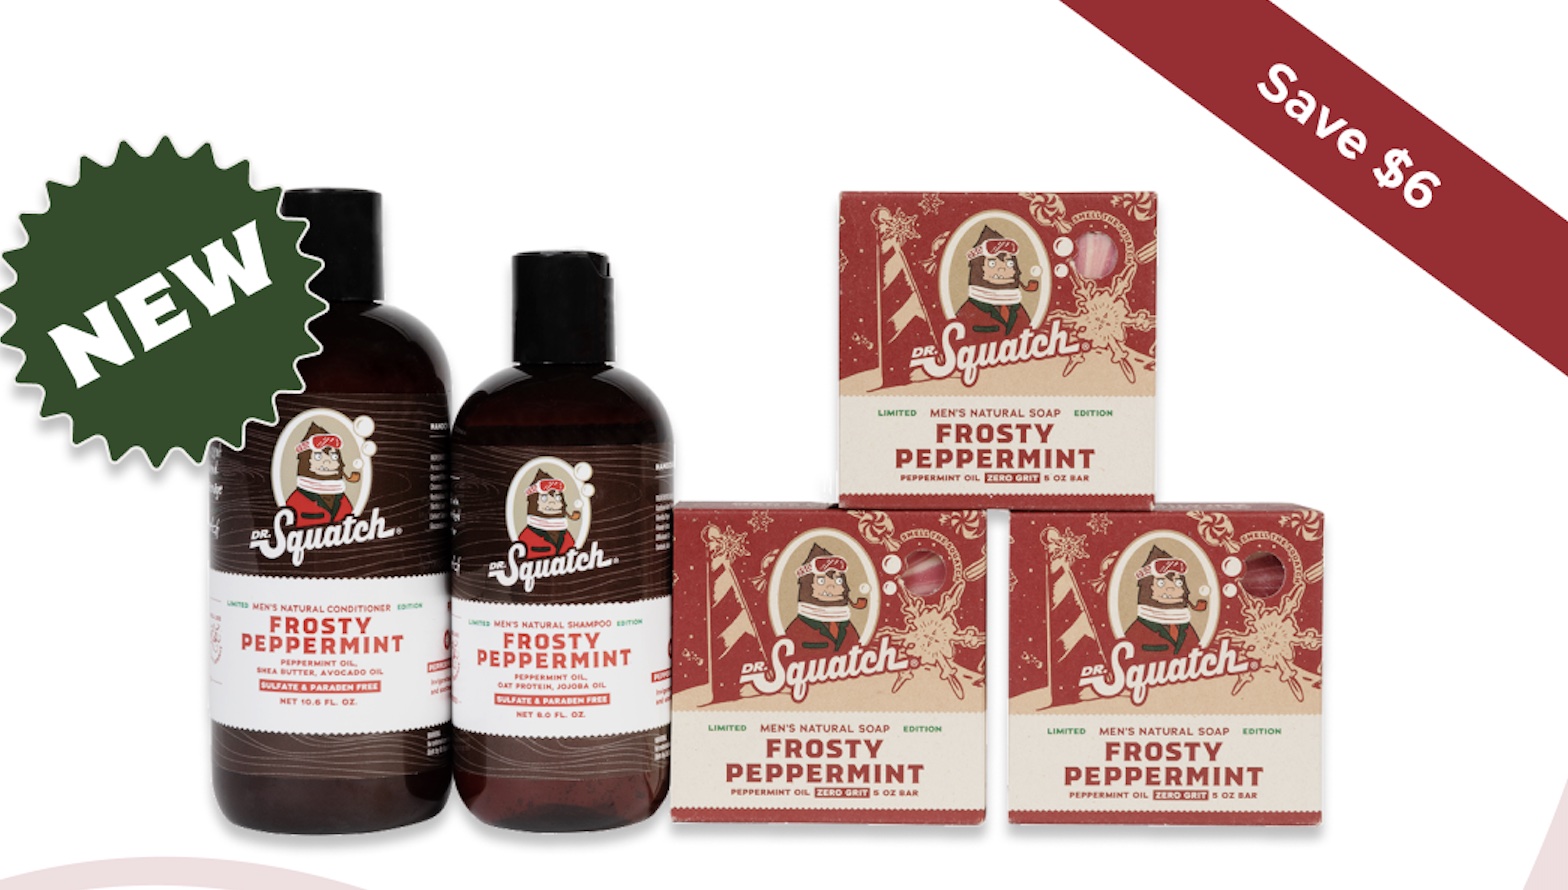 Dr. Squatch - Official Review of Frosty Peppermint 